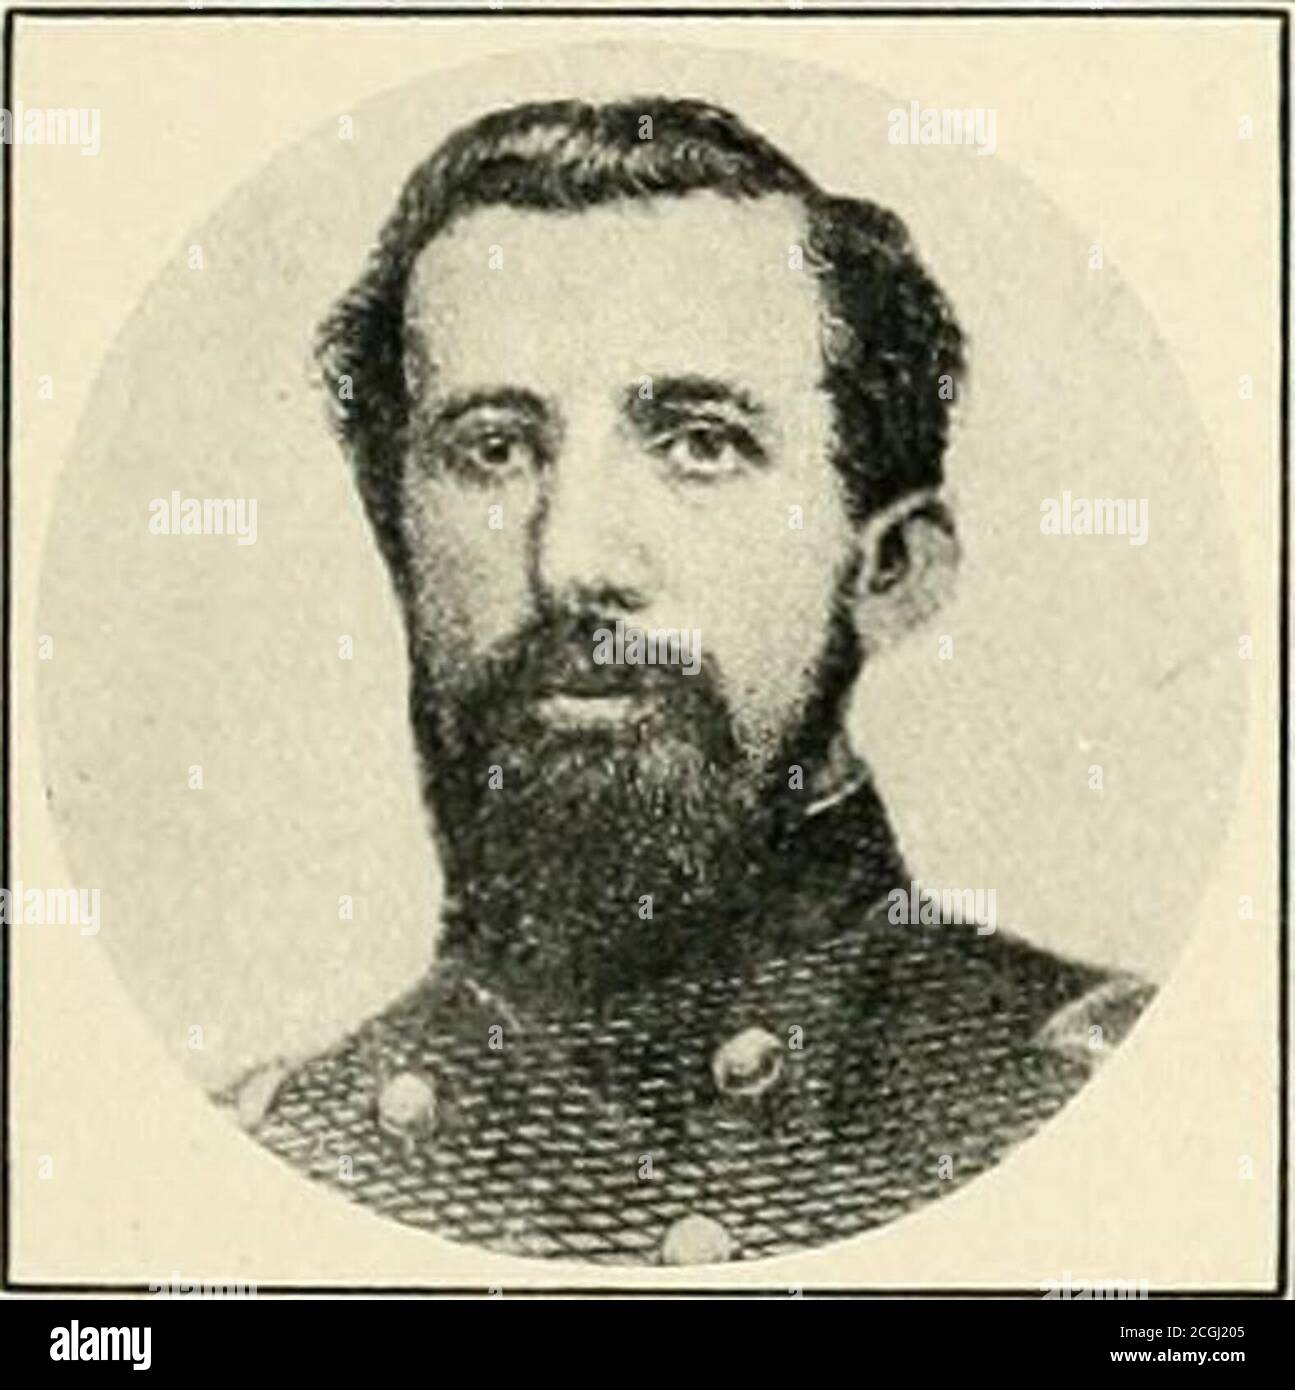 . The photographic history of the civil war.. . Galusha Penny packer, Colo- Joshua T. Owens, Colonel James A. Beaver, Colonel Isaac J. Wistar, Originallynel of the !)7th Regiment. of the G!)th Regiment. of the 148th Regiment. Colonel of the 71st Regt.. Joshua K. Sigfried, Originally Colonel of the 48th Regiment. FEDERAL GENERALS No. 23 PENNSYLVANIA Stock Photo